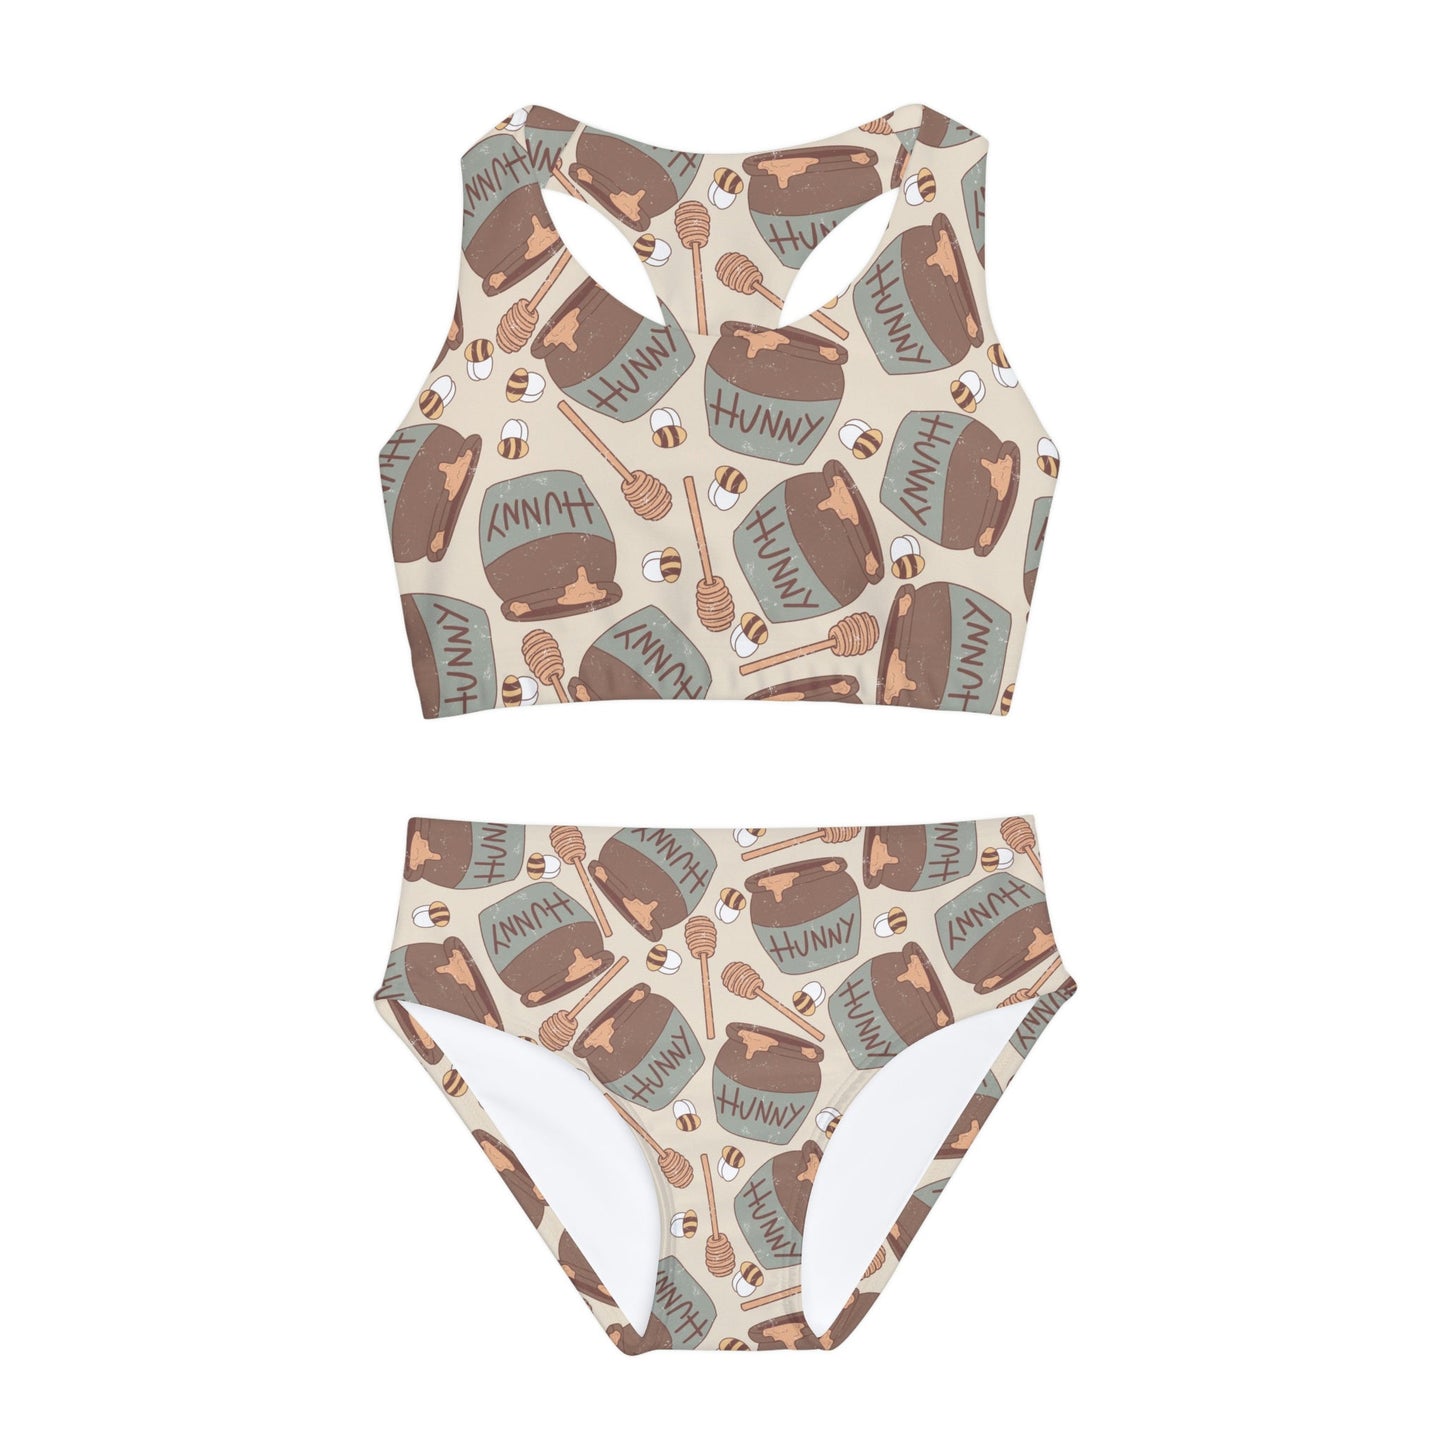 Hunny Pot Girls Two Piece Swimsuit All Over PrintAOPAOP Clothing#tag4##tag5##tag6#